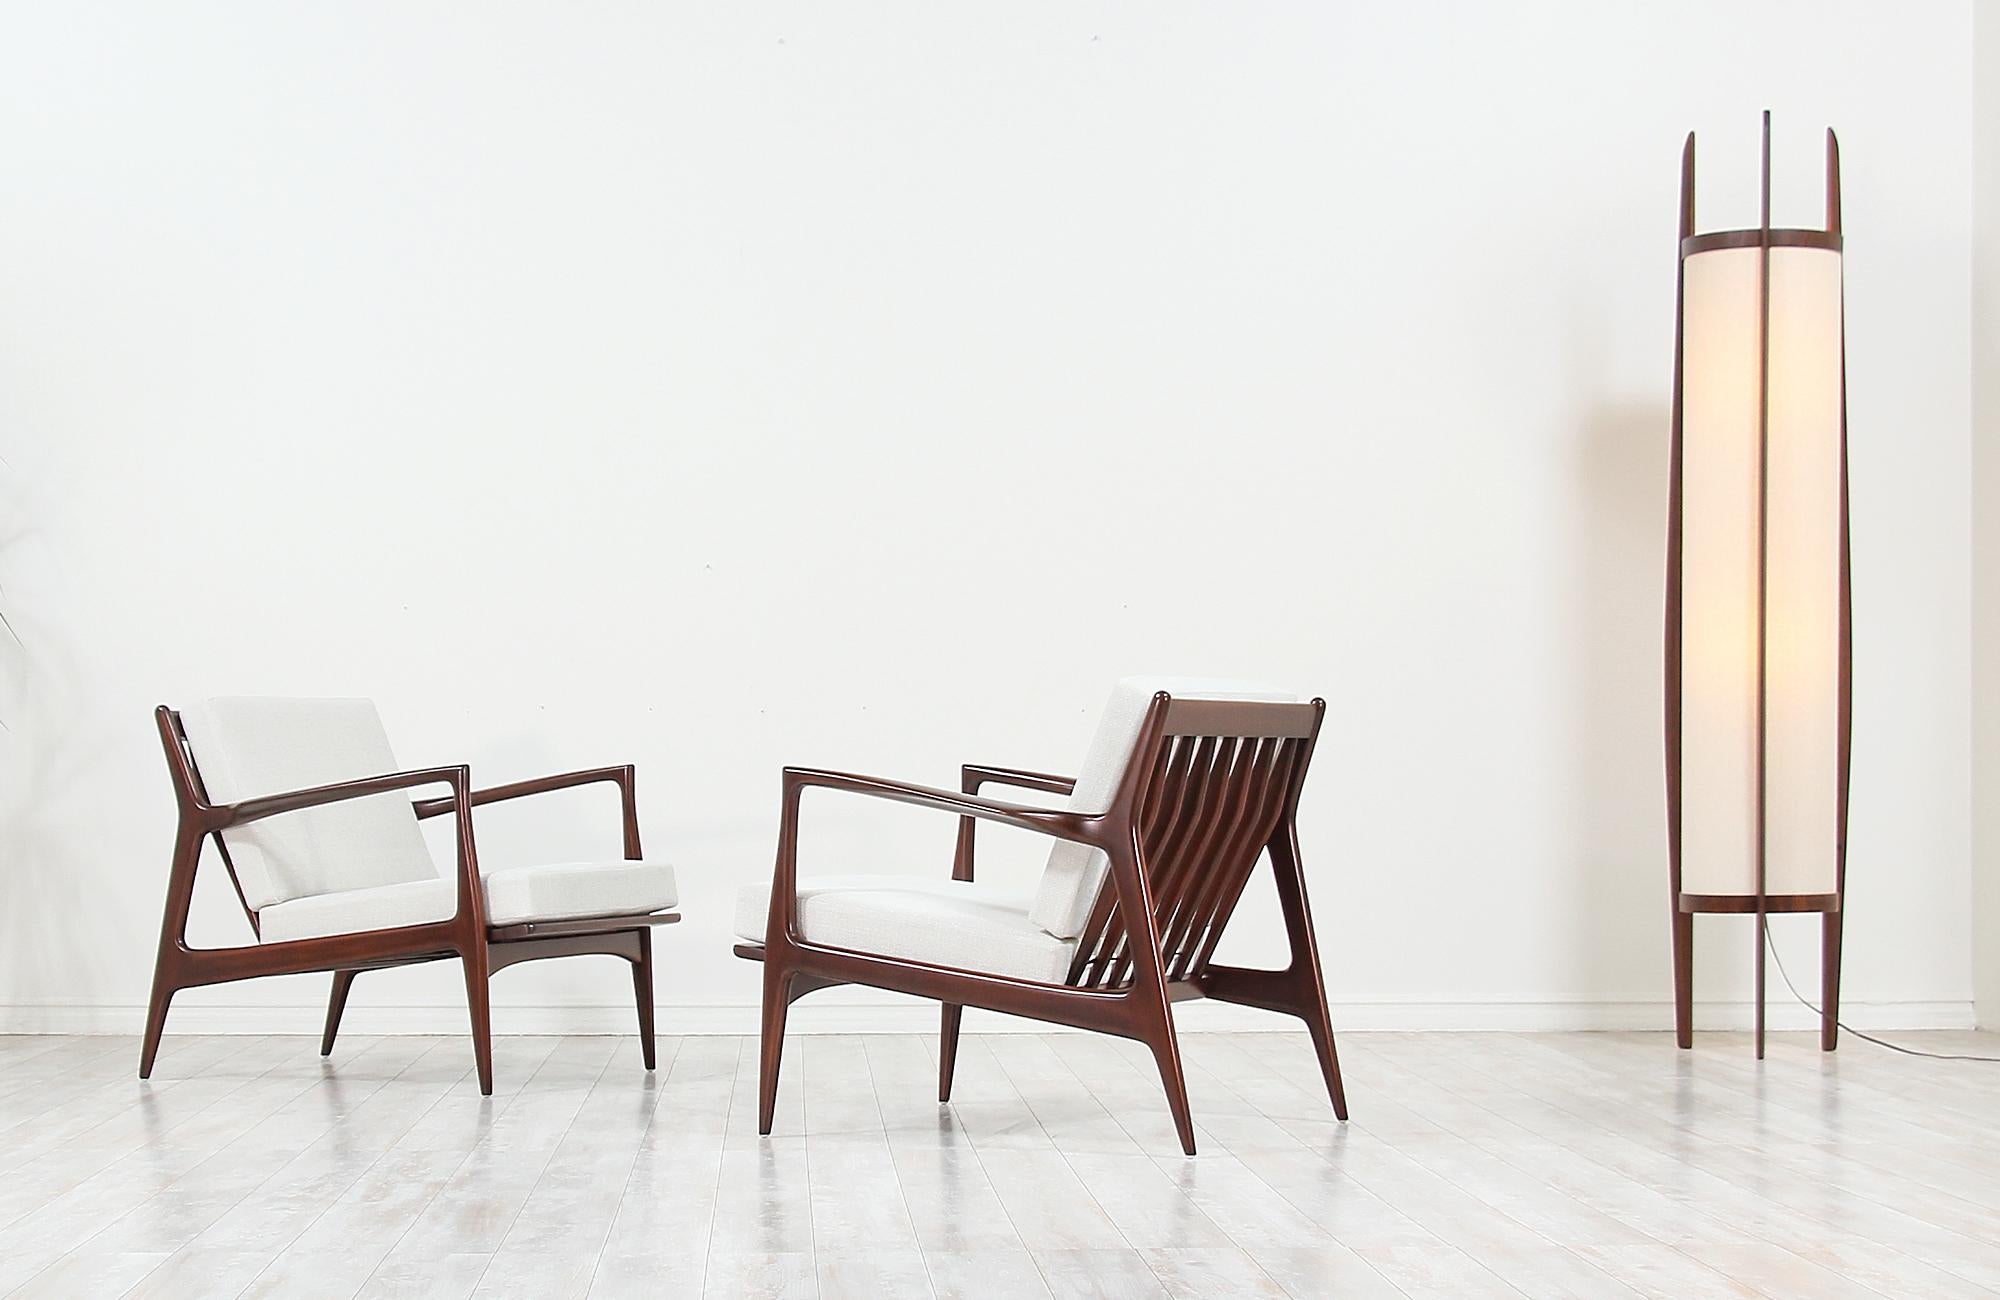 Danish Ib Kofod-Larsen Sculpted Lounge Chairs for Selig